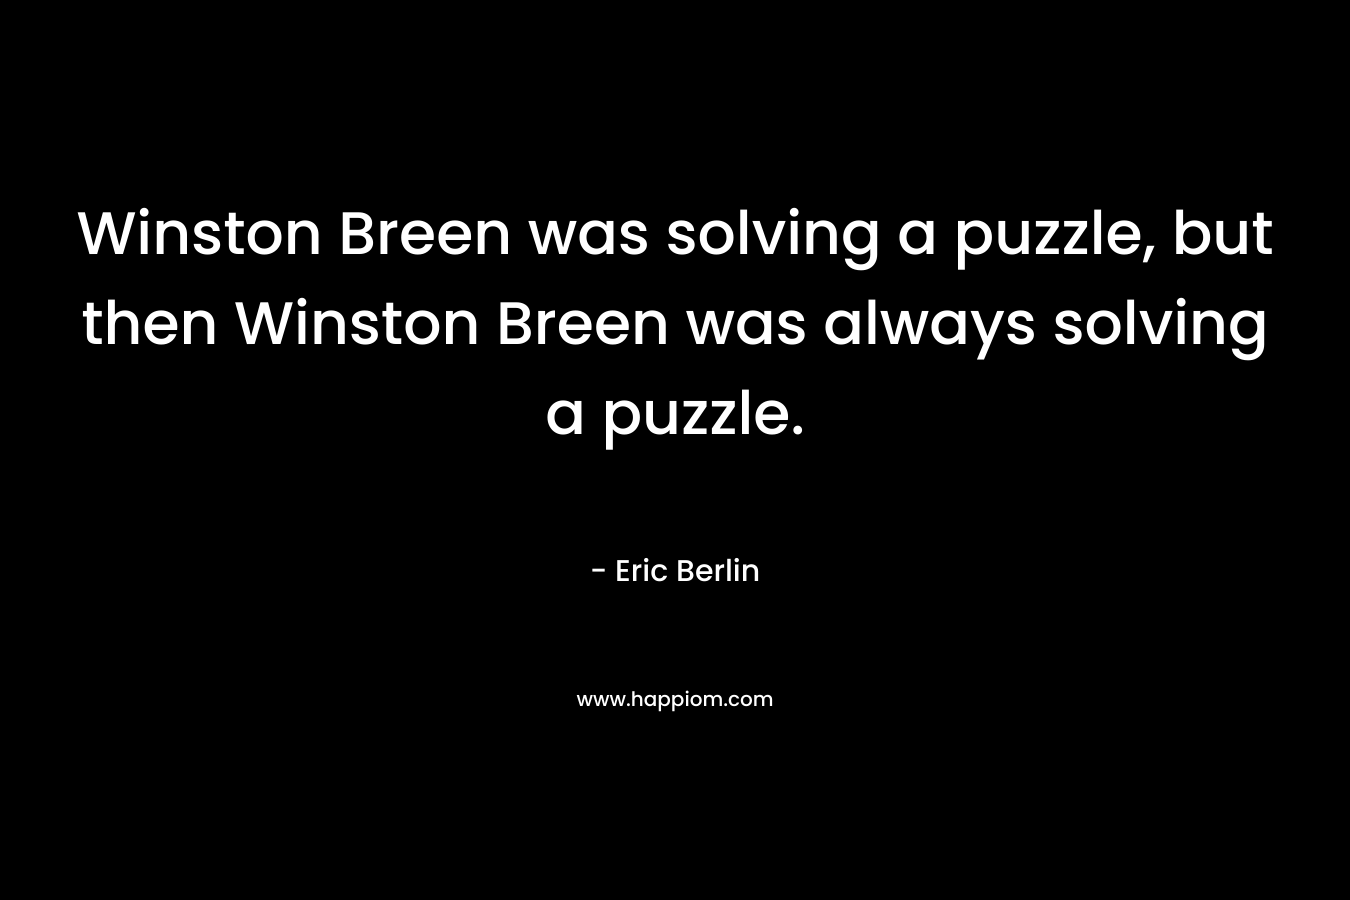 Winston Breen was solving a puzzle, but then Winston Breen was always solving a puzzle.